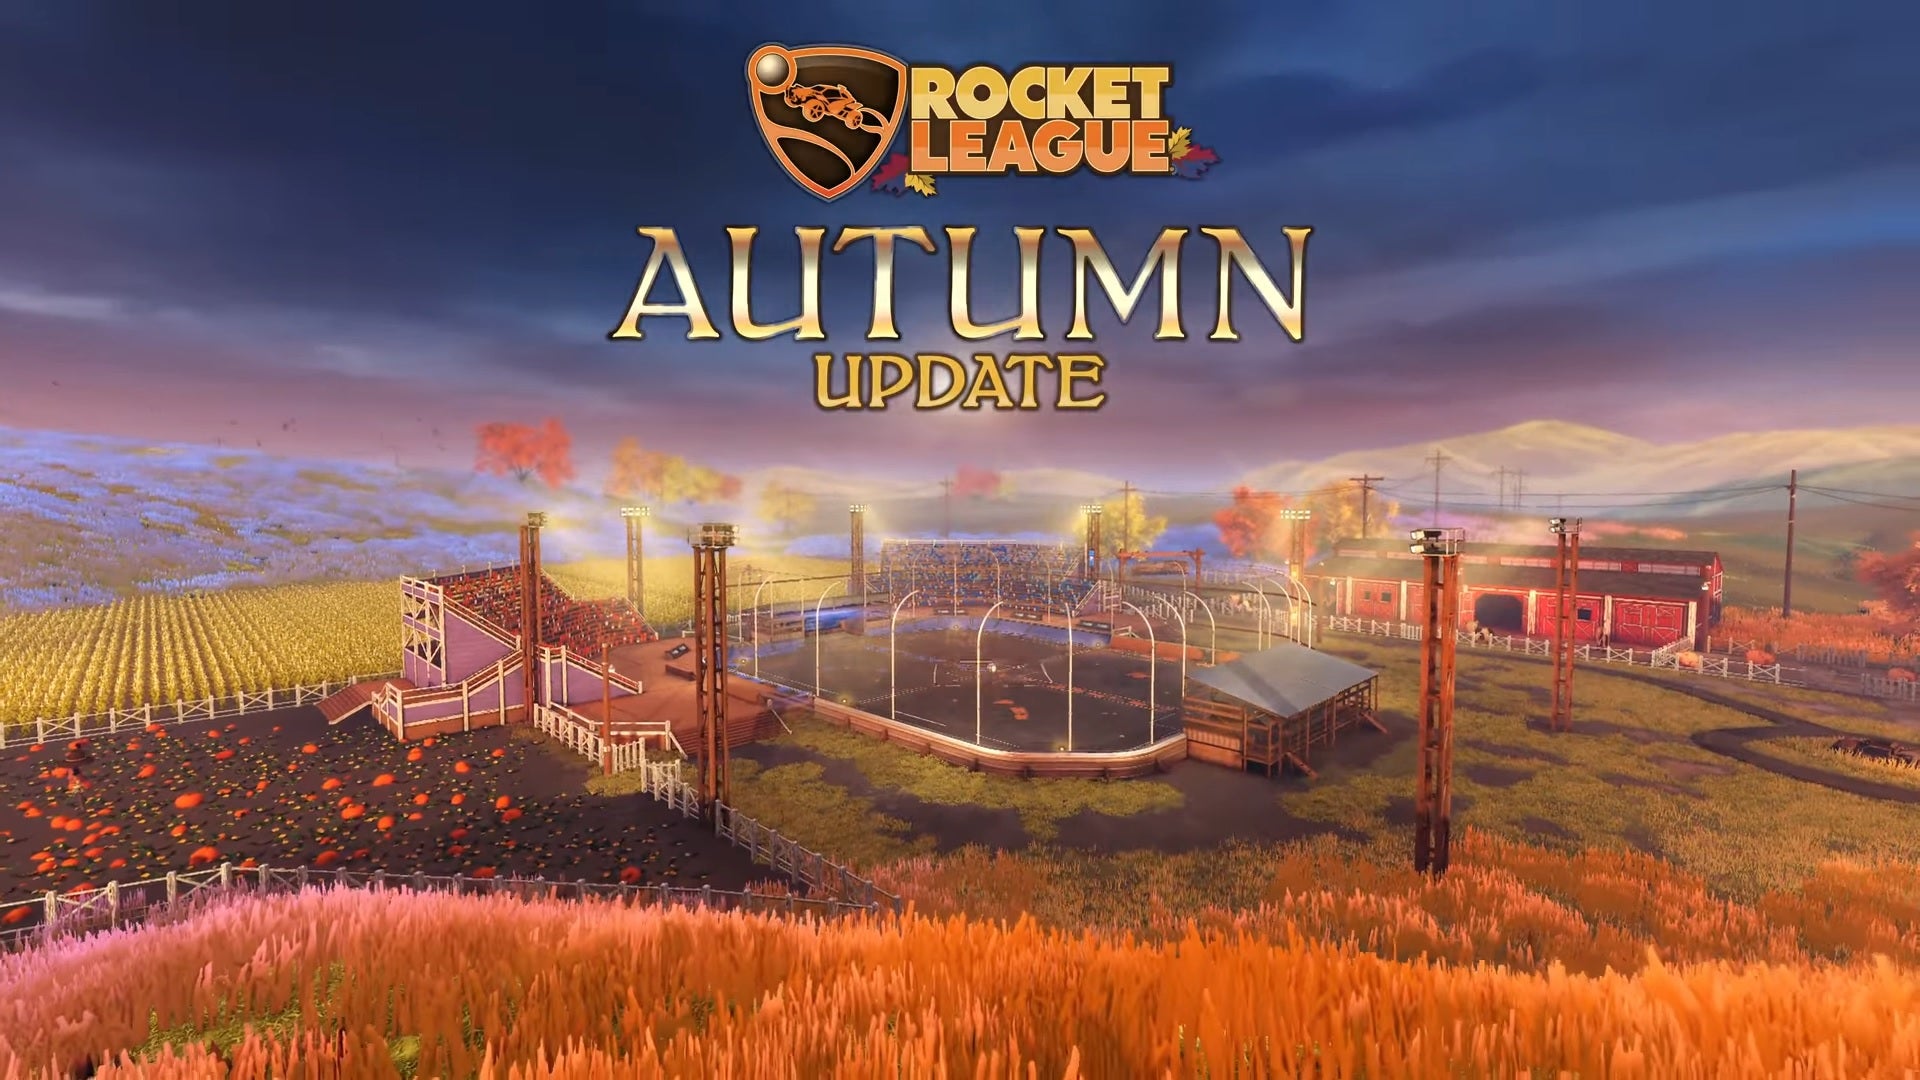 Image for Rocket League's Autumn update is live, contains over 90 free items